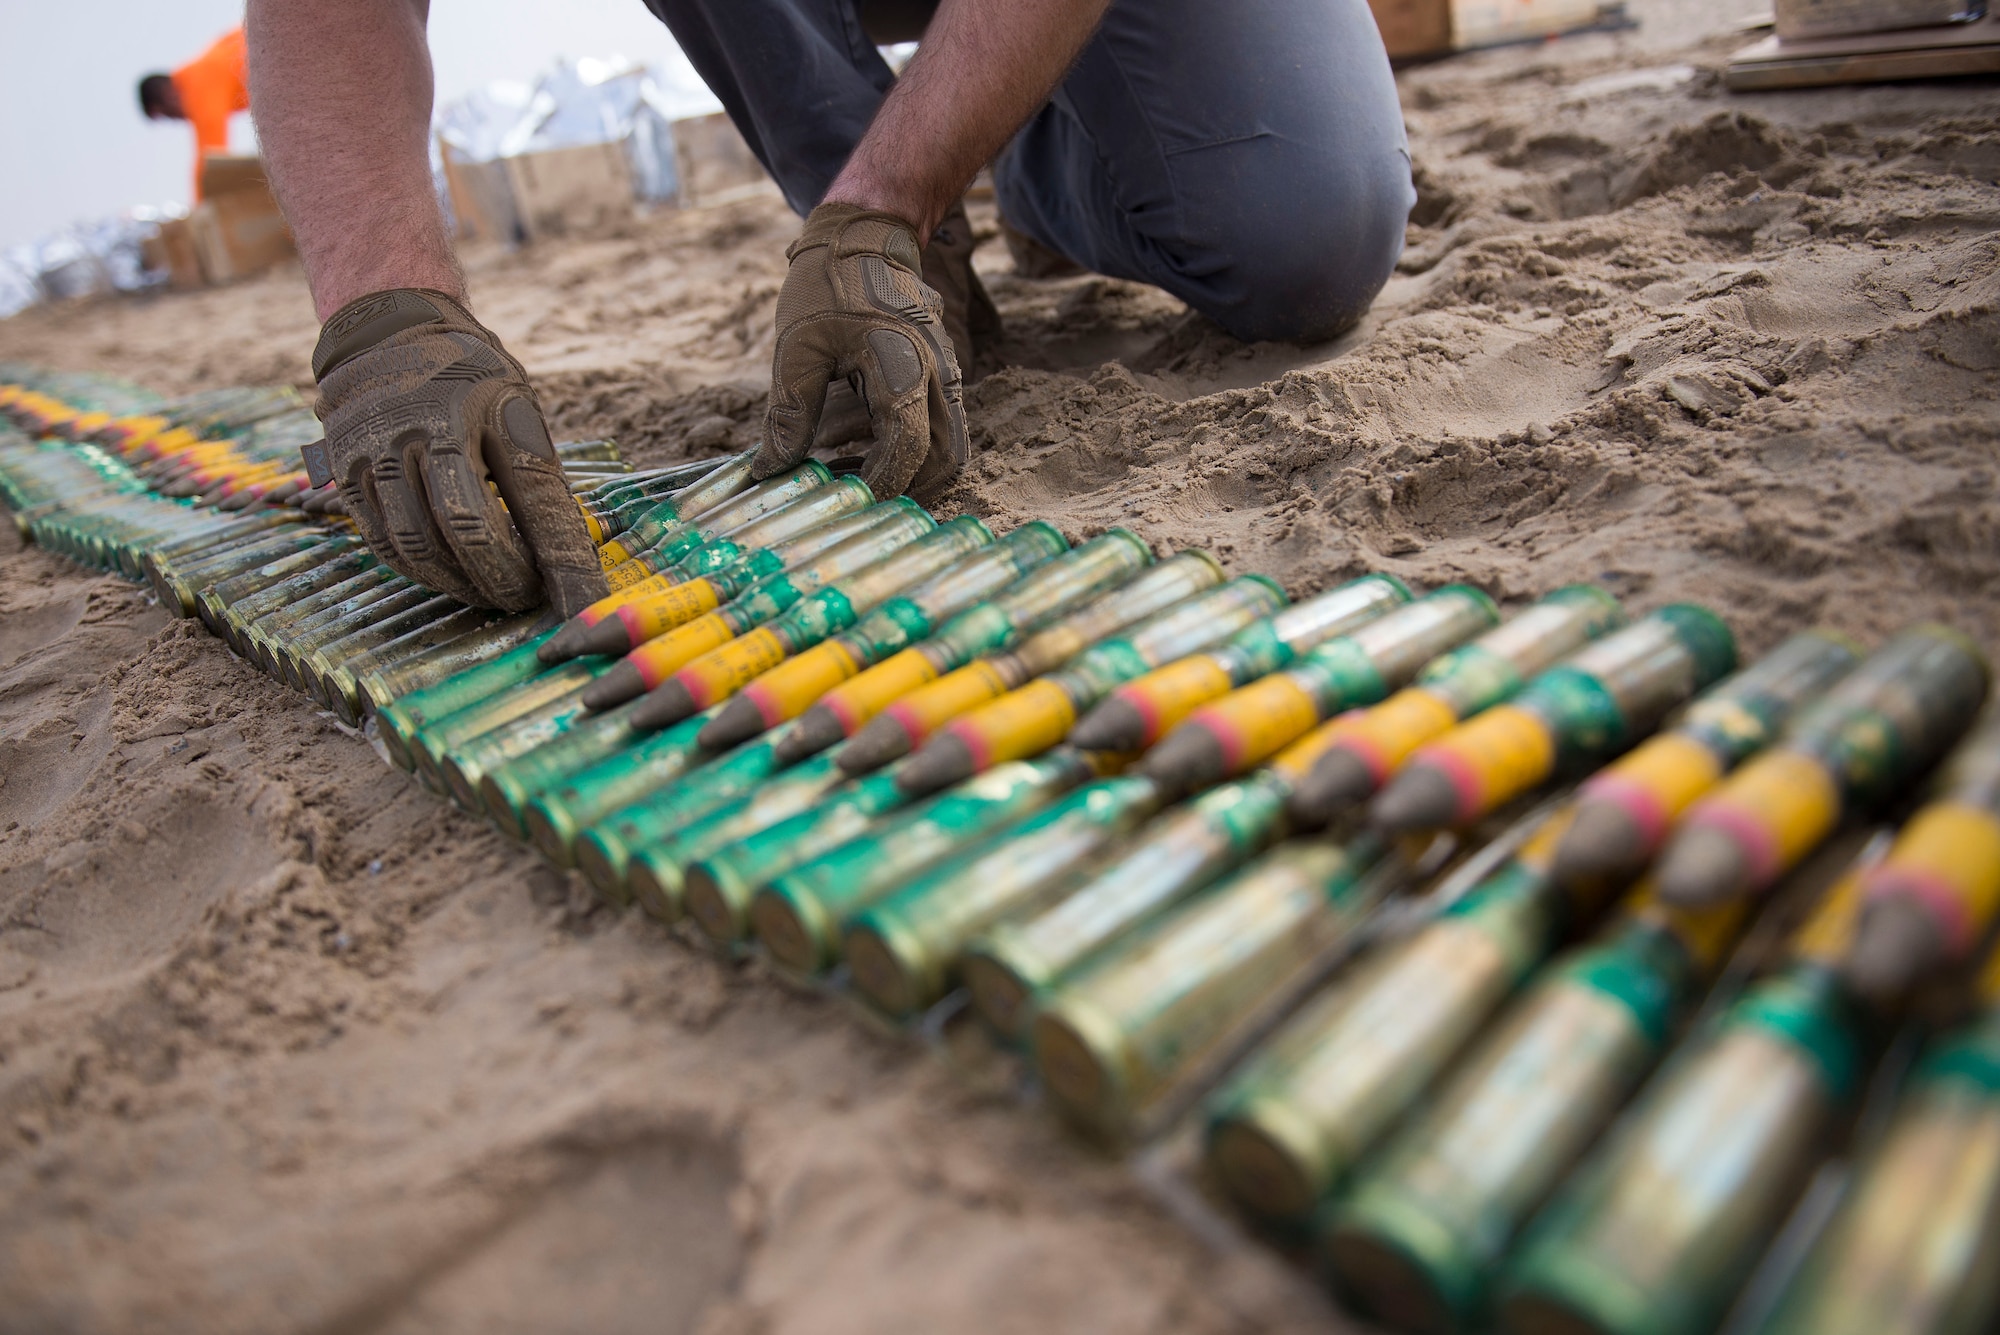 A U.S. Airman assigned to the 380th Expeditionary Civil Engineer Squadron (ECES) Explosive Ordnance Disposal (EOD) flight arranges munitions to be safely disposed of as part of an ammunitions disposition request (ADR) near Al Dhafra Air Base, United Arab Emirates, Dec. 5, 2020.